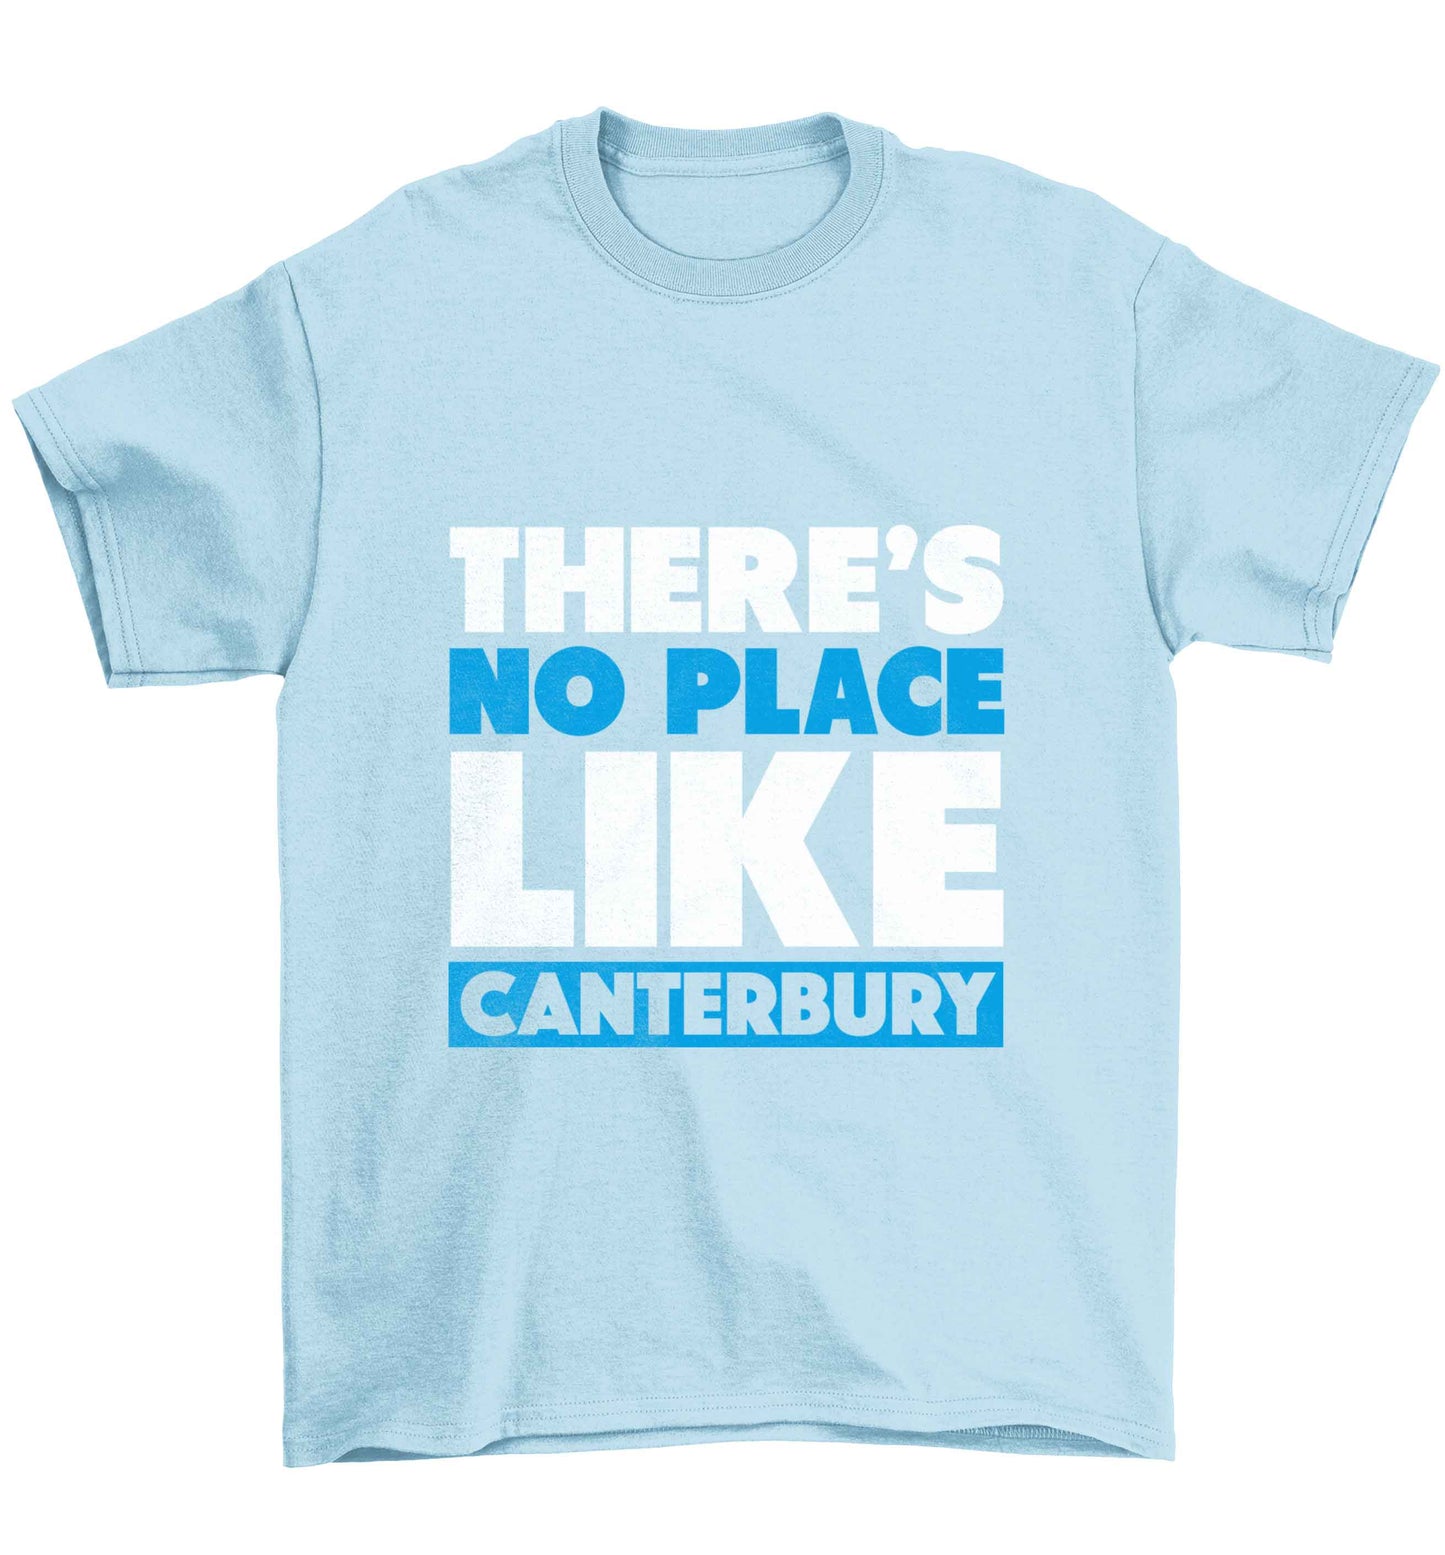 There's no place like Canterbury Children's light blue Tshirt 12-13 Years